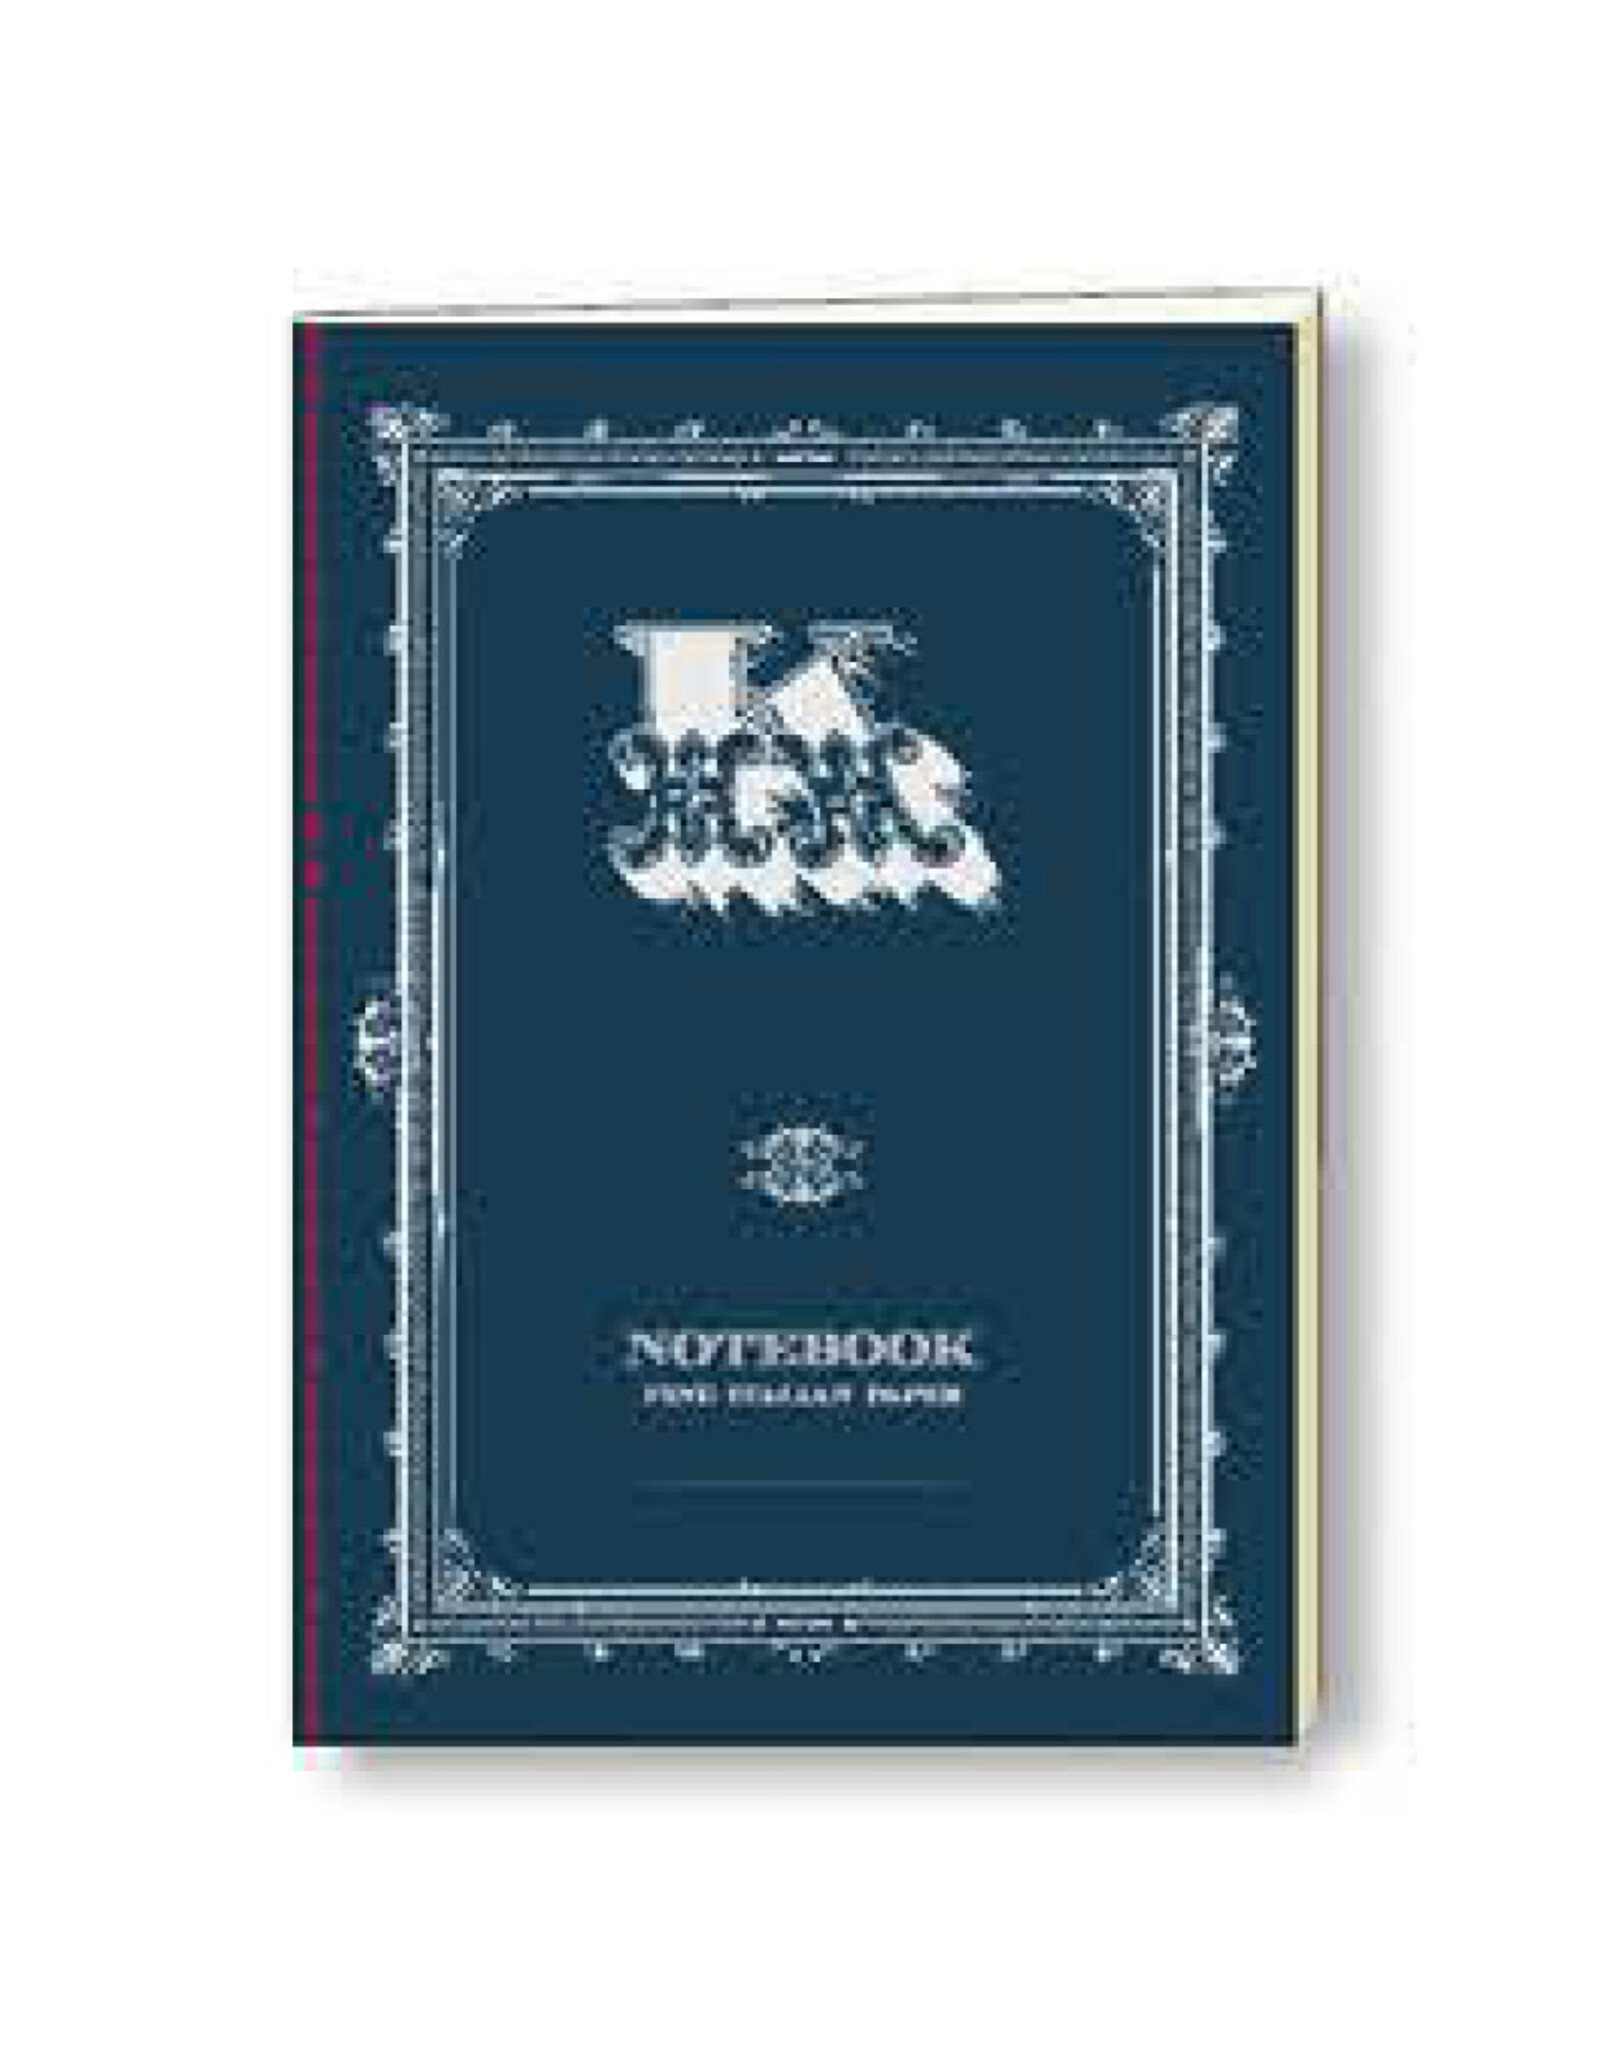 Rossi K Alphabet Softcover Notebook